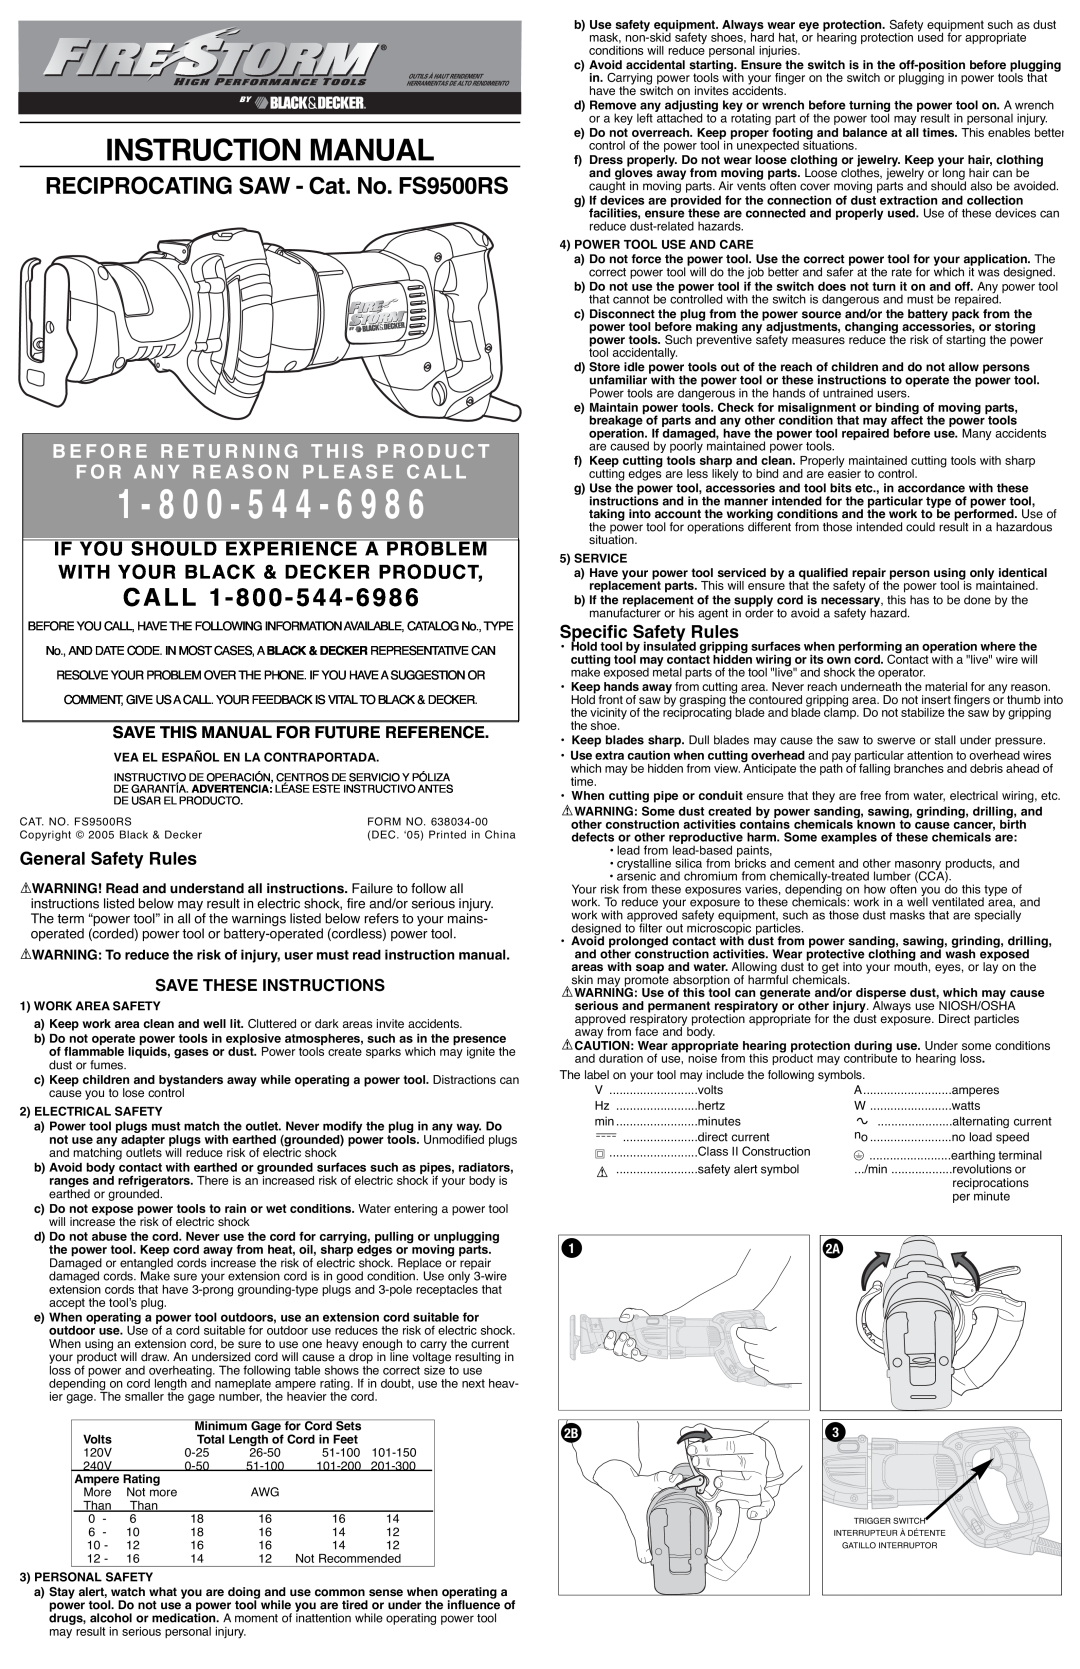 Black & Decker 638034-00 instruction manual If You Should Experience A Problem With Your Black & Decker Product, Call 